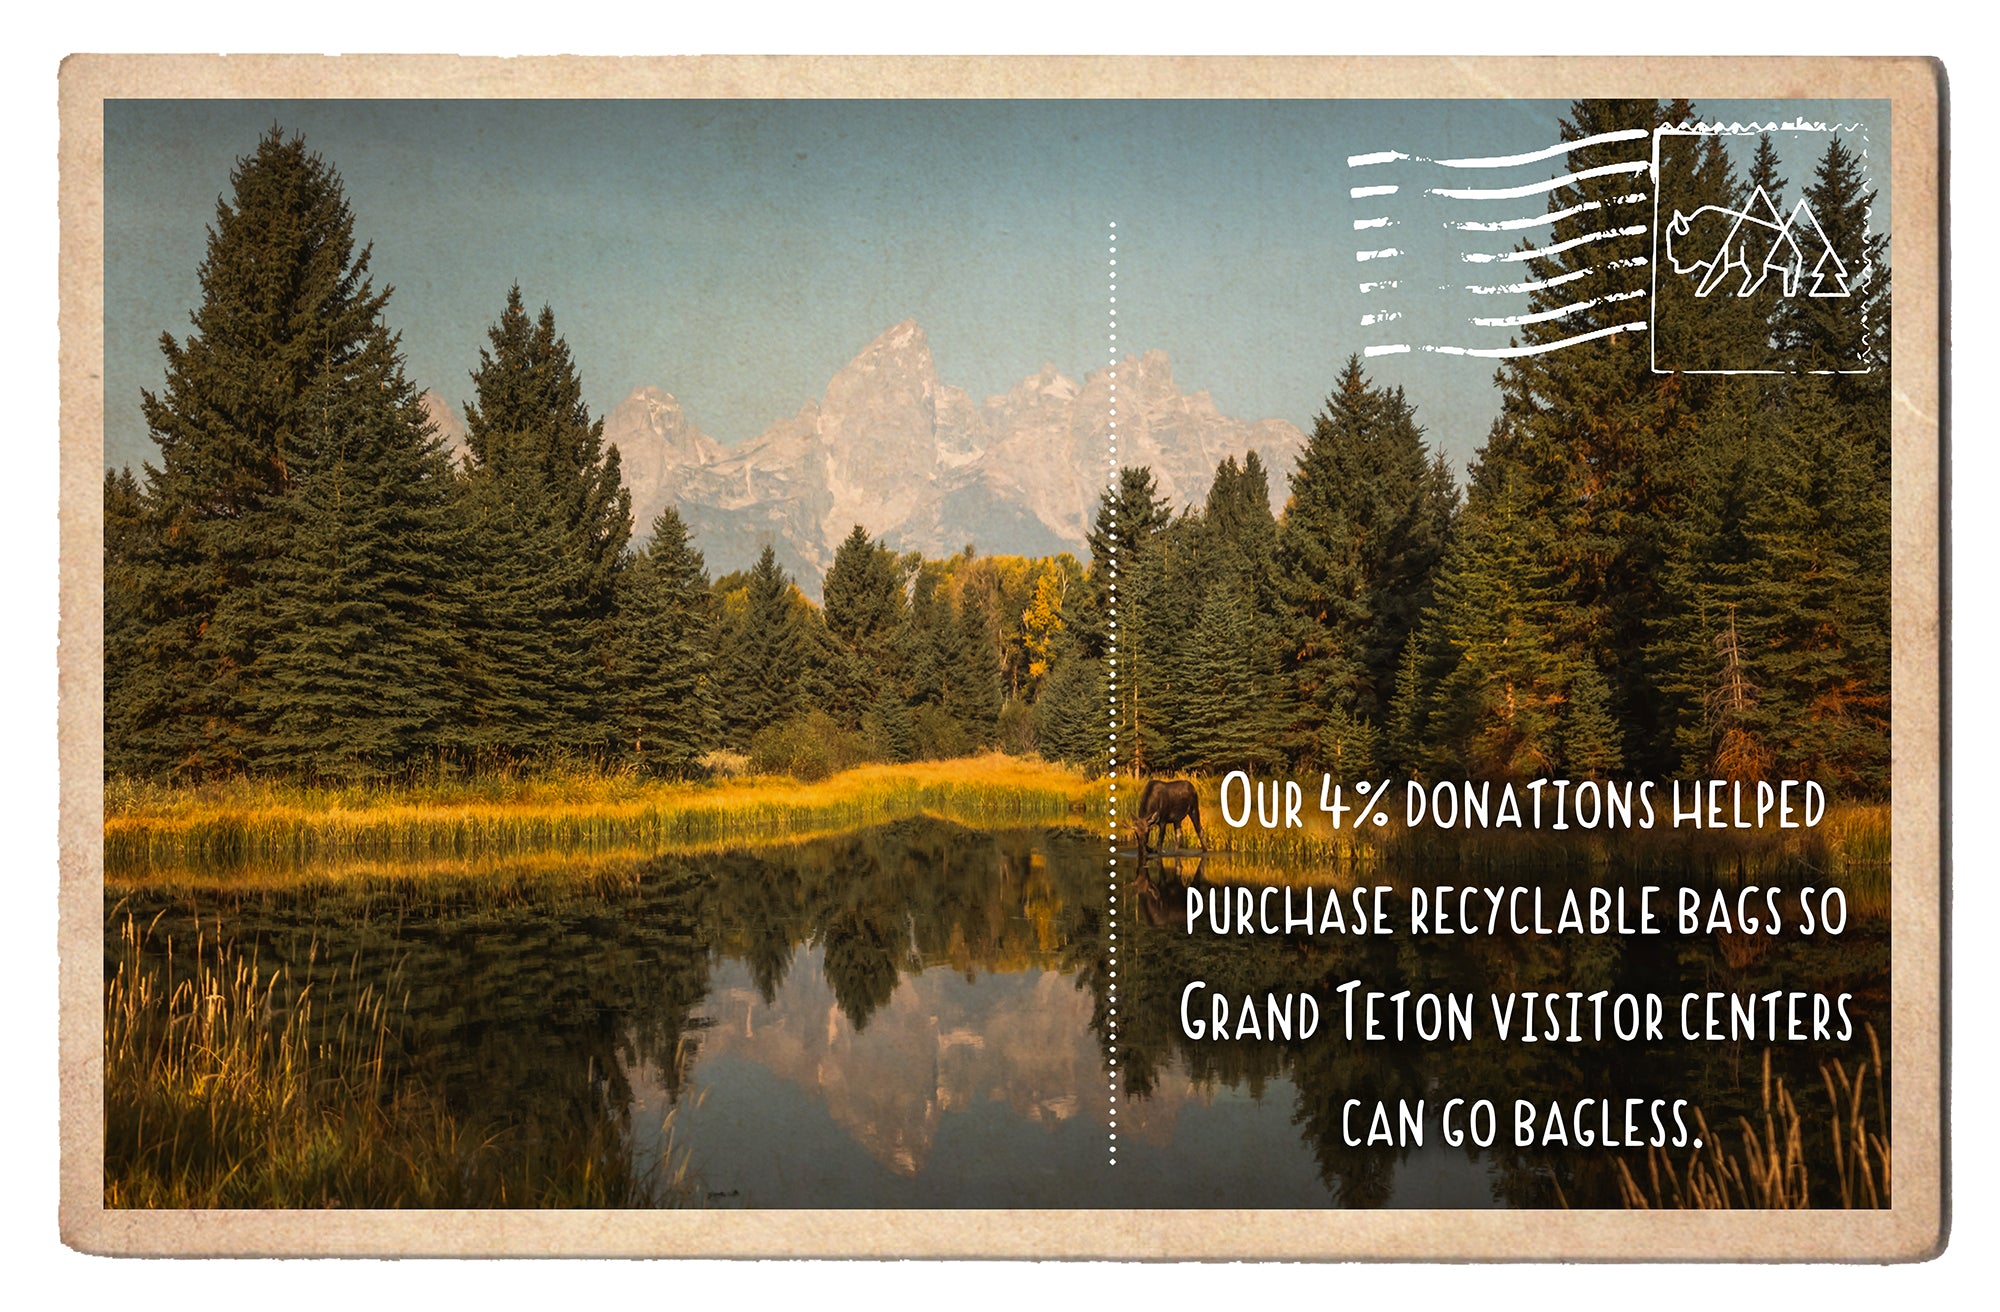 Purchased Recyclable Bags for Grand Teton Visitor Centers